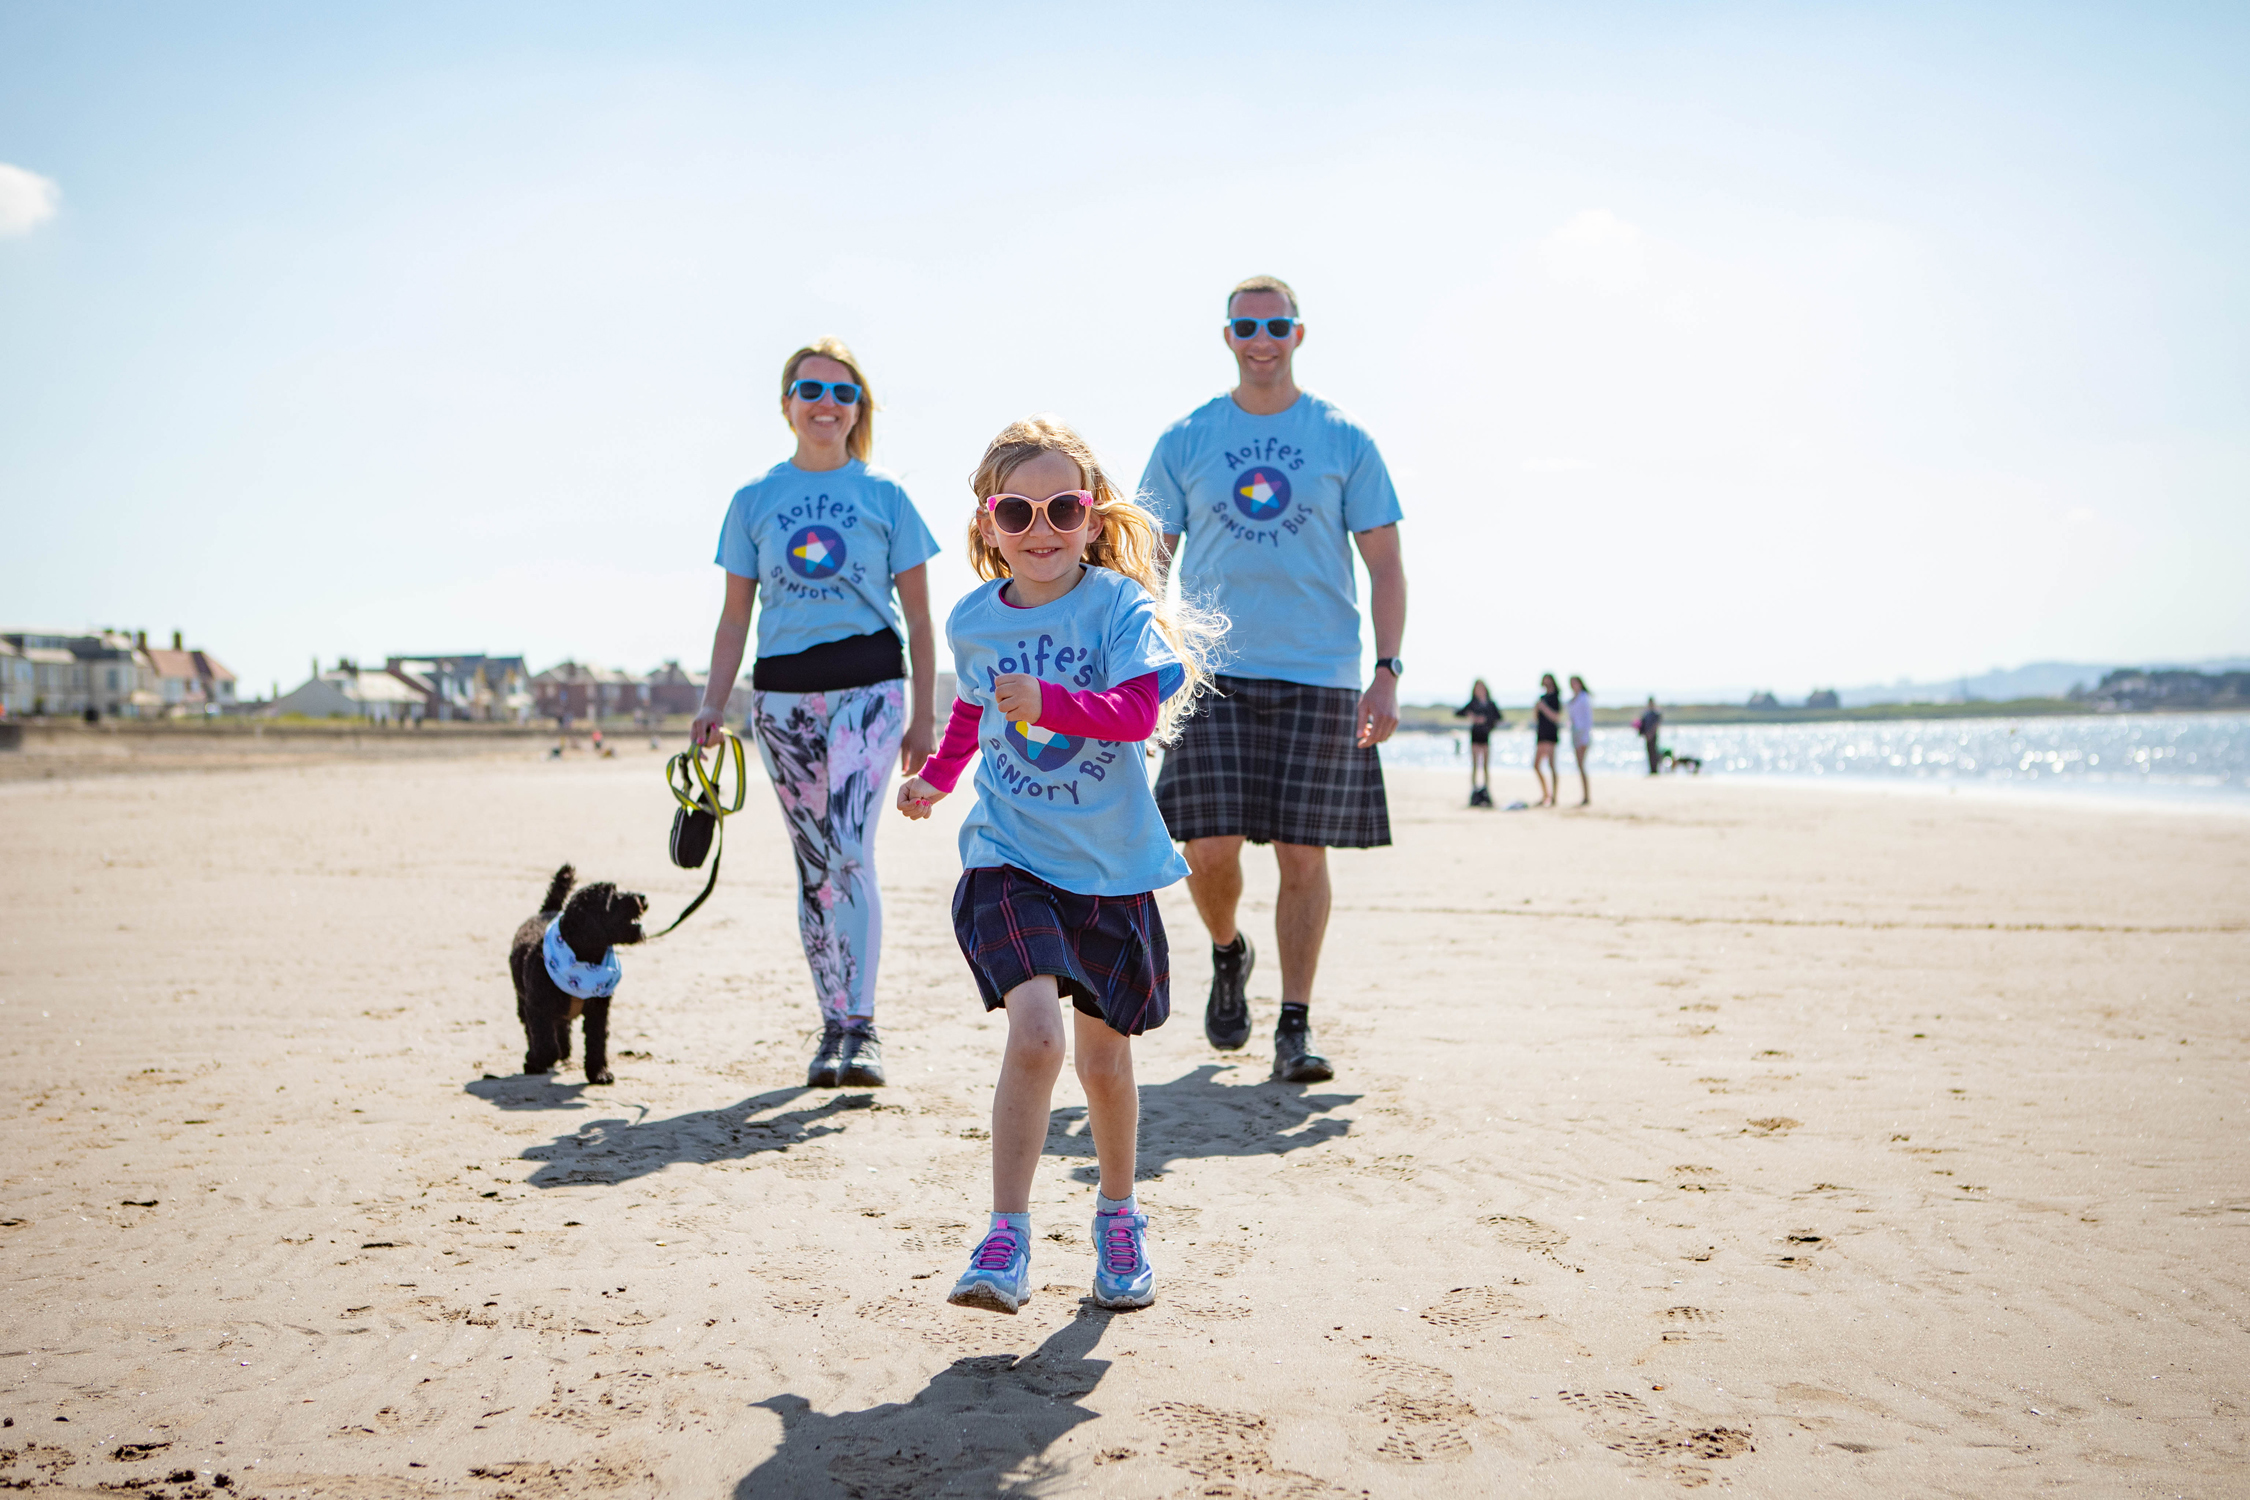 Trustees for the charity Aoife’s Sensory Bus, Michael Kidd and wife Evelyn and daughter Eilidh, five, and their dog Cora from Ayrshire walking the perimeter of Ayrshire including Arran to raise funds for the charity. Photographed on Prestwick